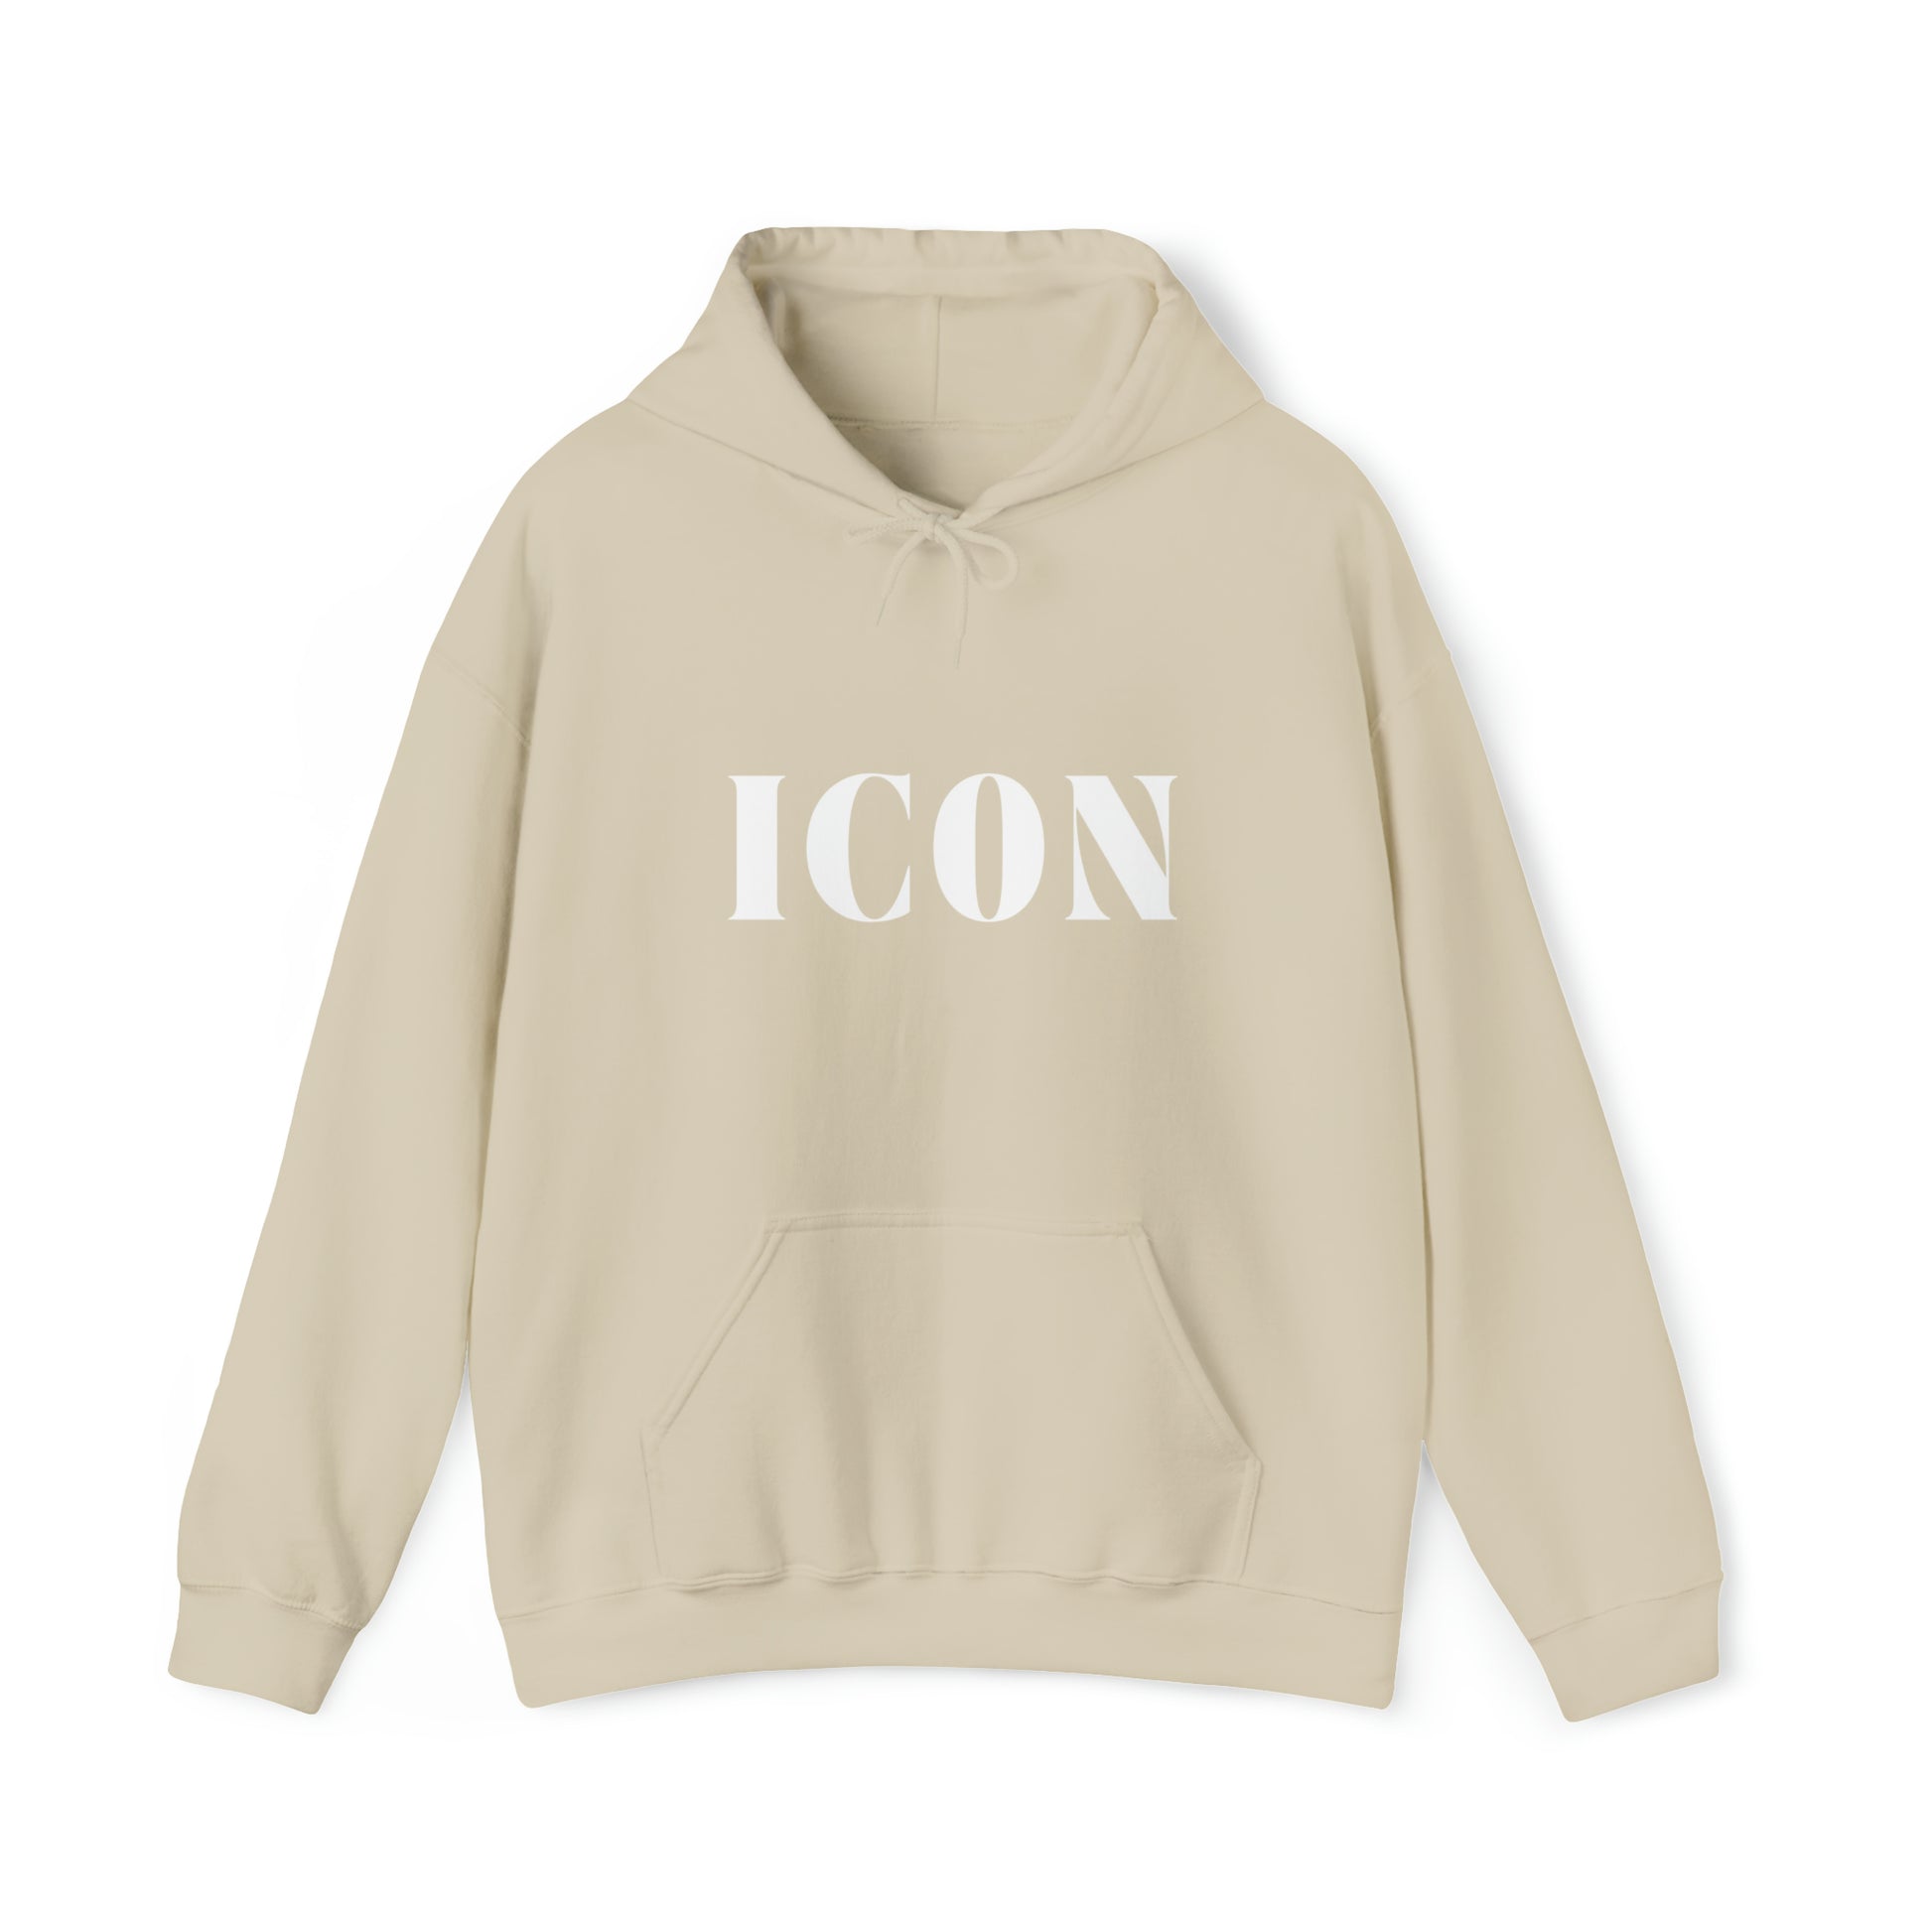 S Sand Icon Hoodie from HoodySZN.com